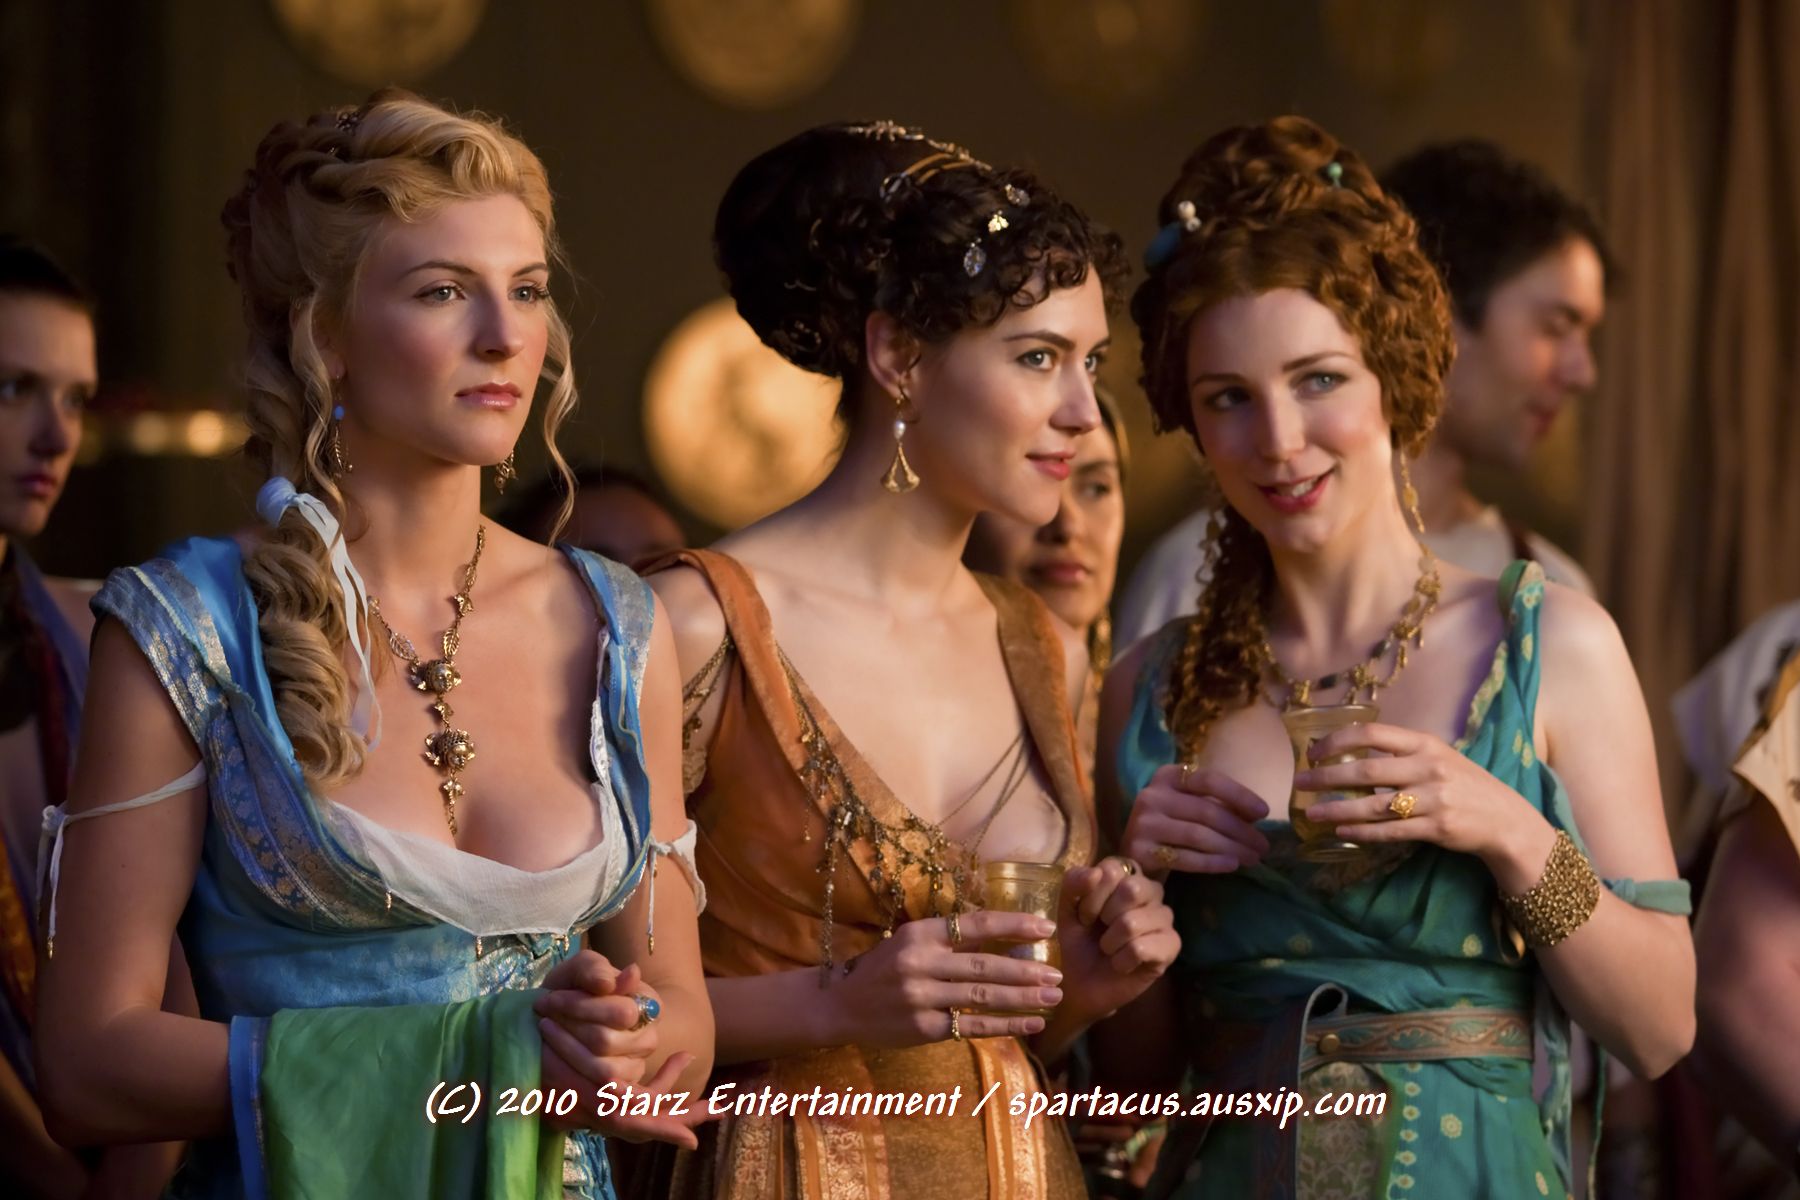 Tania Nolan as Caecilia, with Amelia and Ilthyia in Spartacus:Blood and Sand, 2010